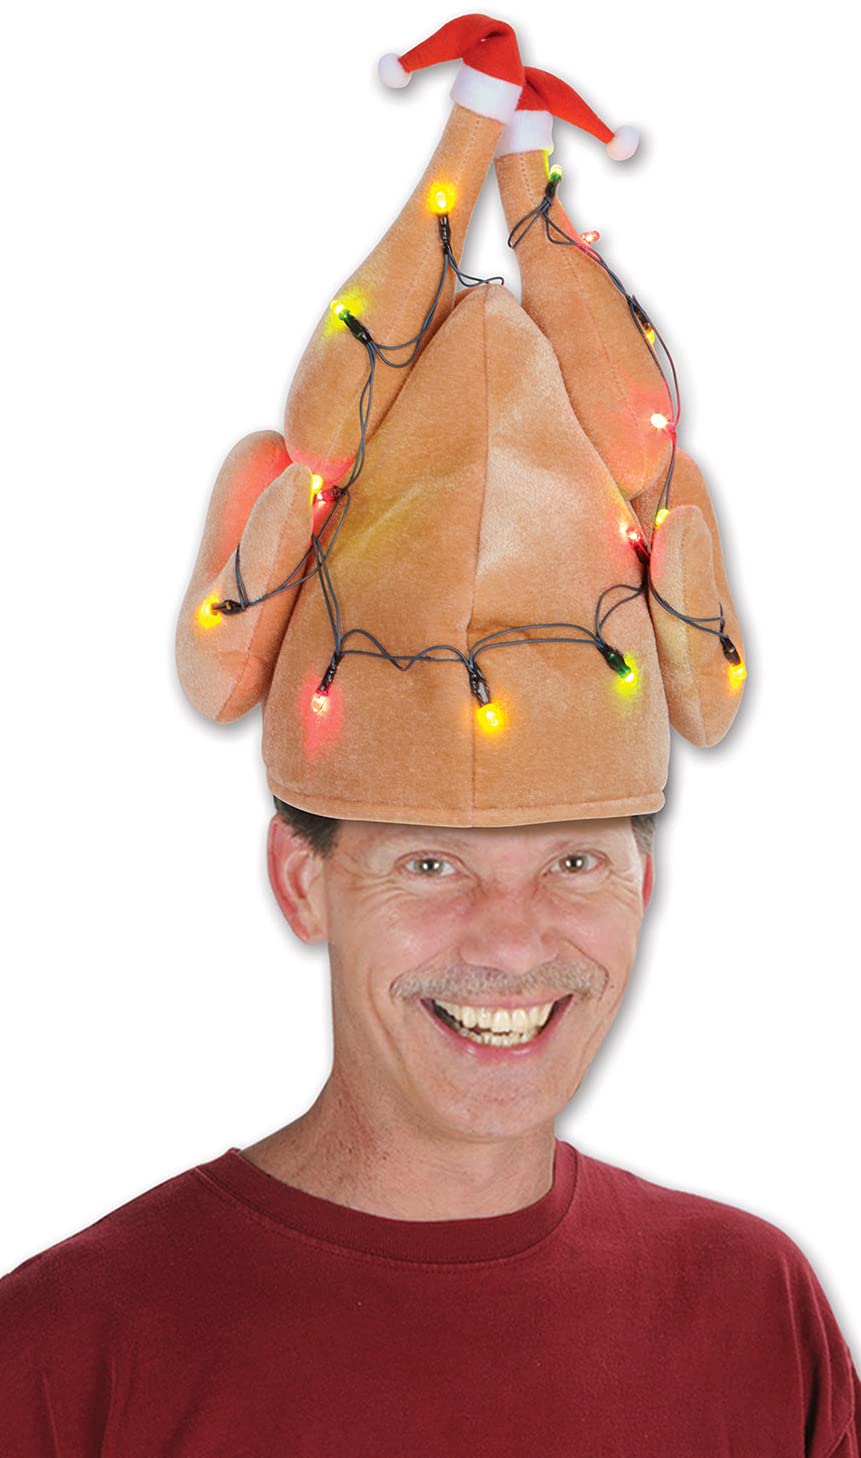 Beistle 1-Pack Plush Light-Up Christmas Turkey Hat (20742), red/white/tan, one size